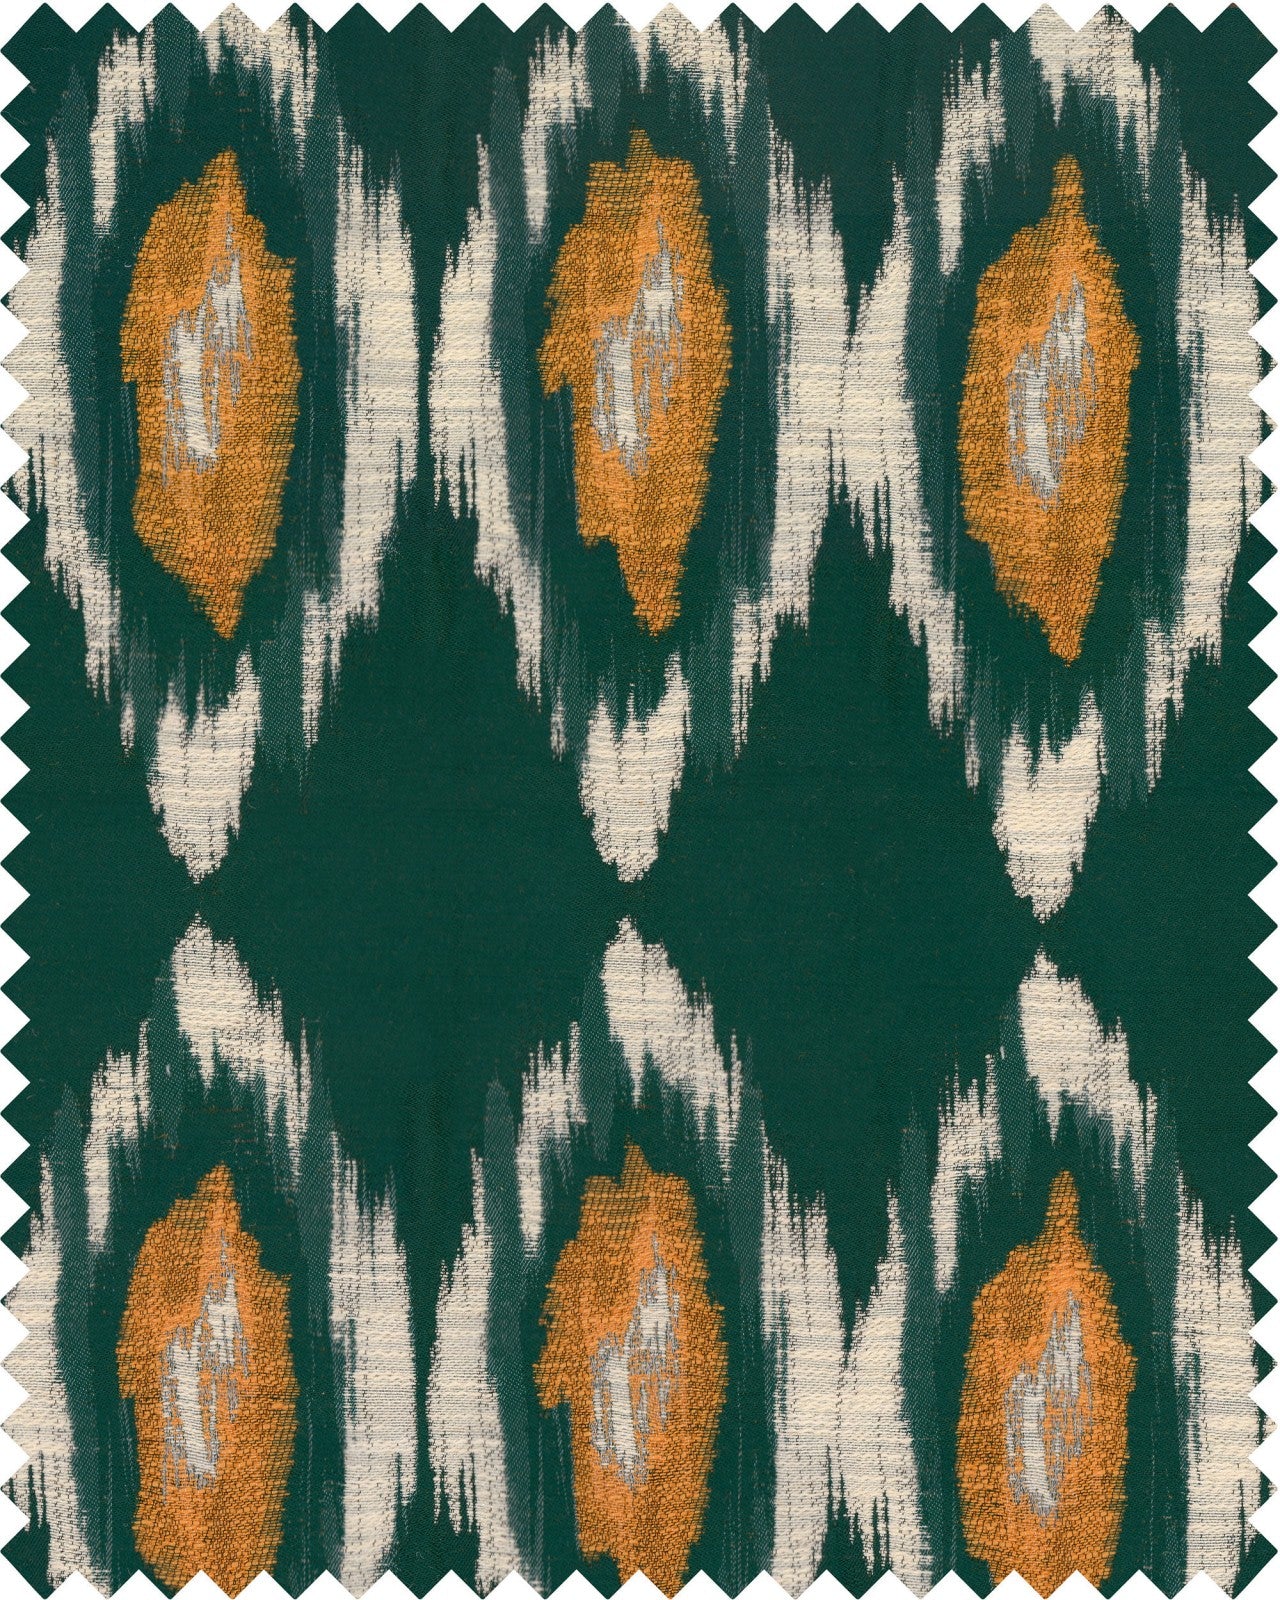 Pradesh Ikat fabric in green orange taupe color - pattern number FB00084 - by Mind The Gap in the Woodstock collection